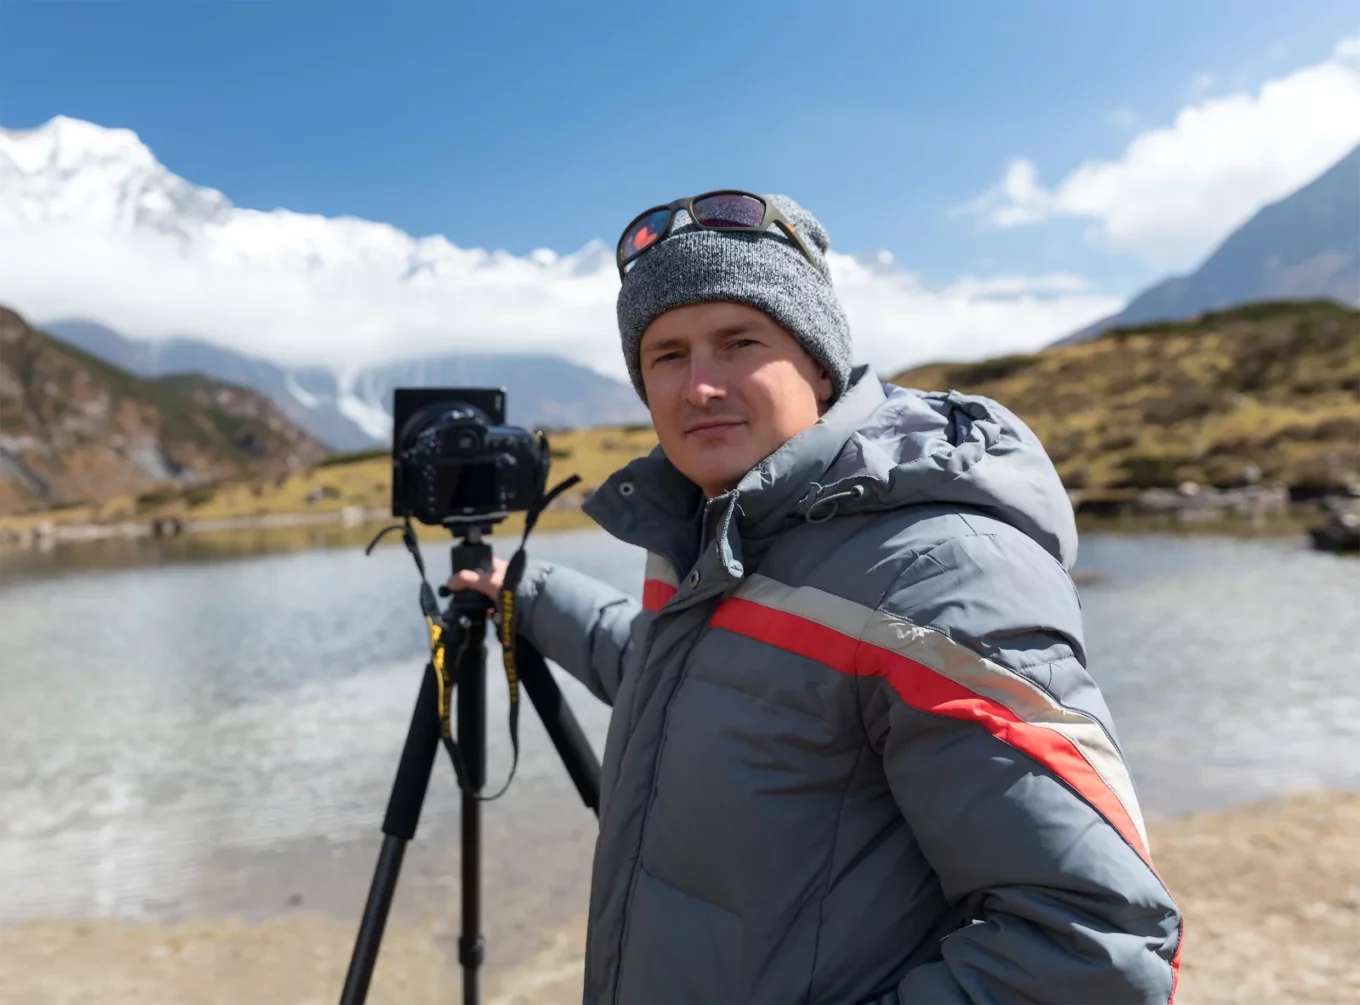 Image of Denys in front of a mountain and lake scene holding a camera on a tripod.